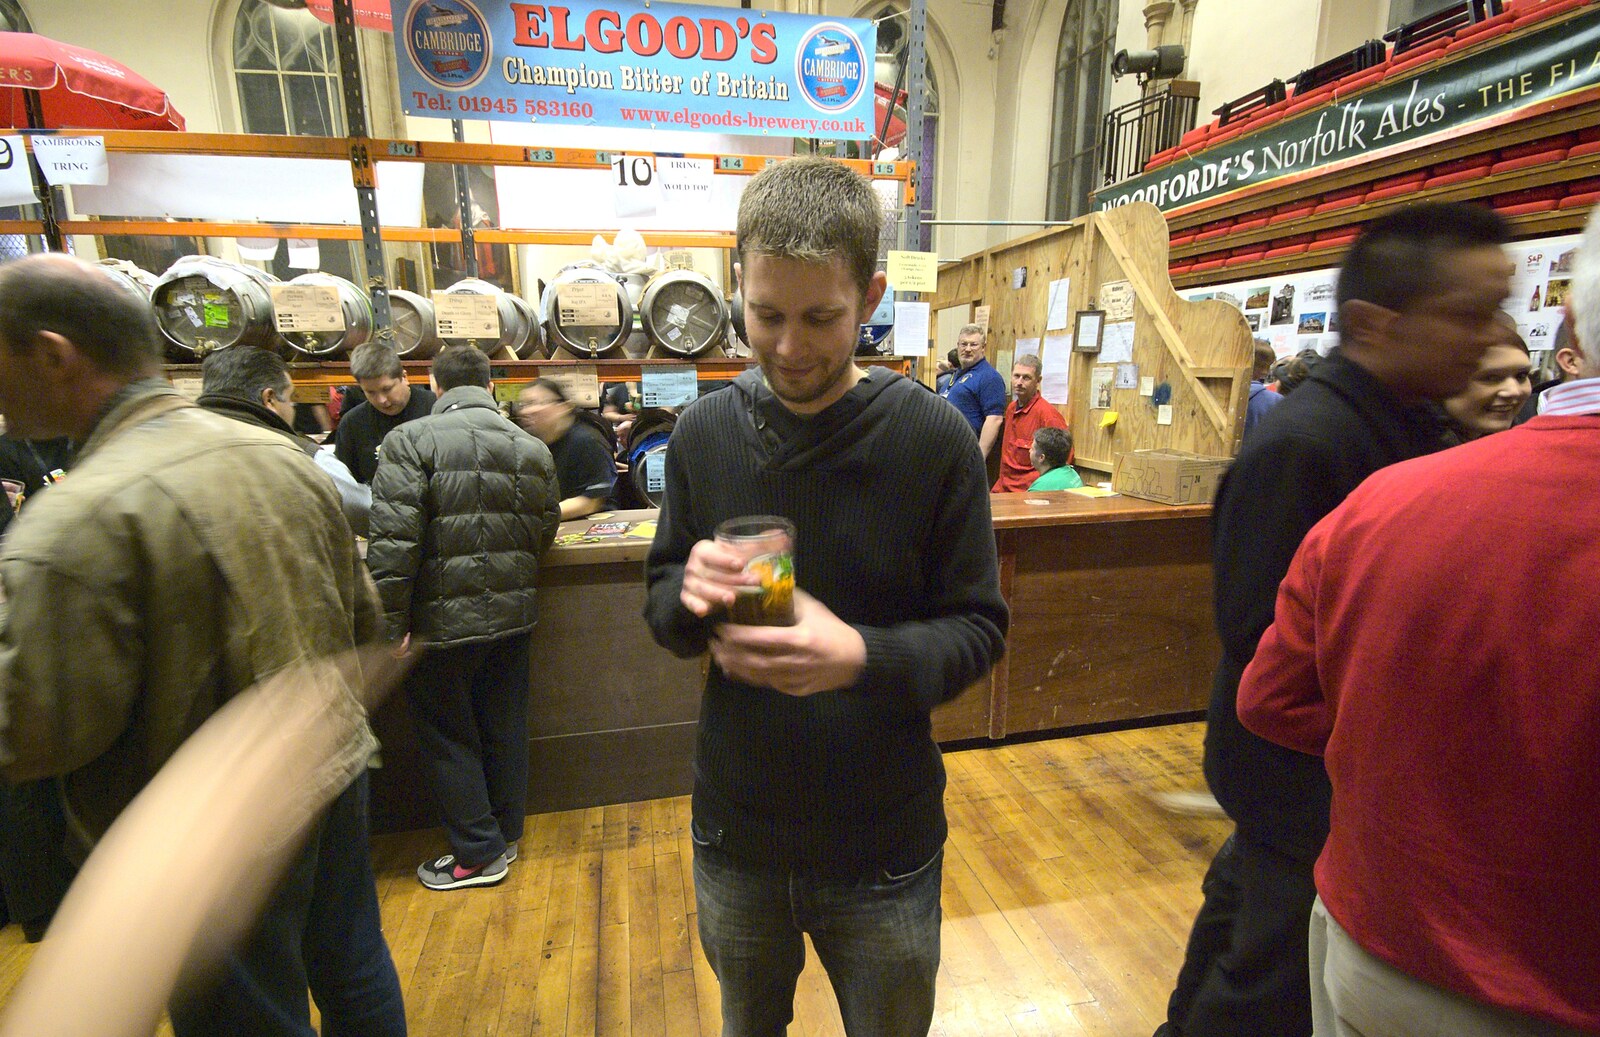 The Boy Phil gets his first beer in from The Norwich Beer Festival, St. Andrew's Hall, Norwich, Norfolk - 27th October 2010